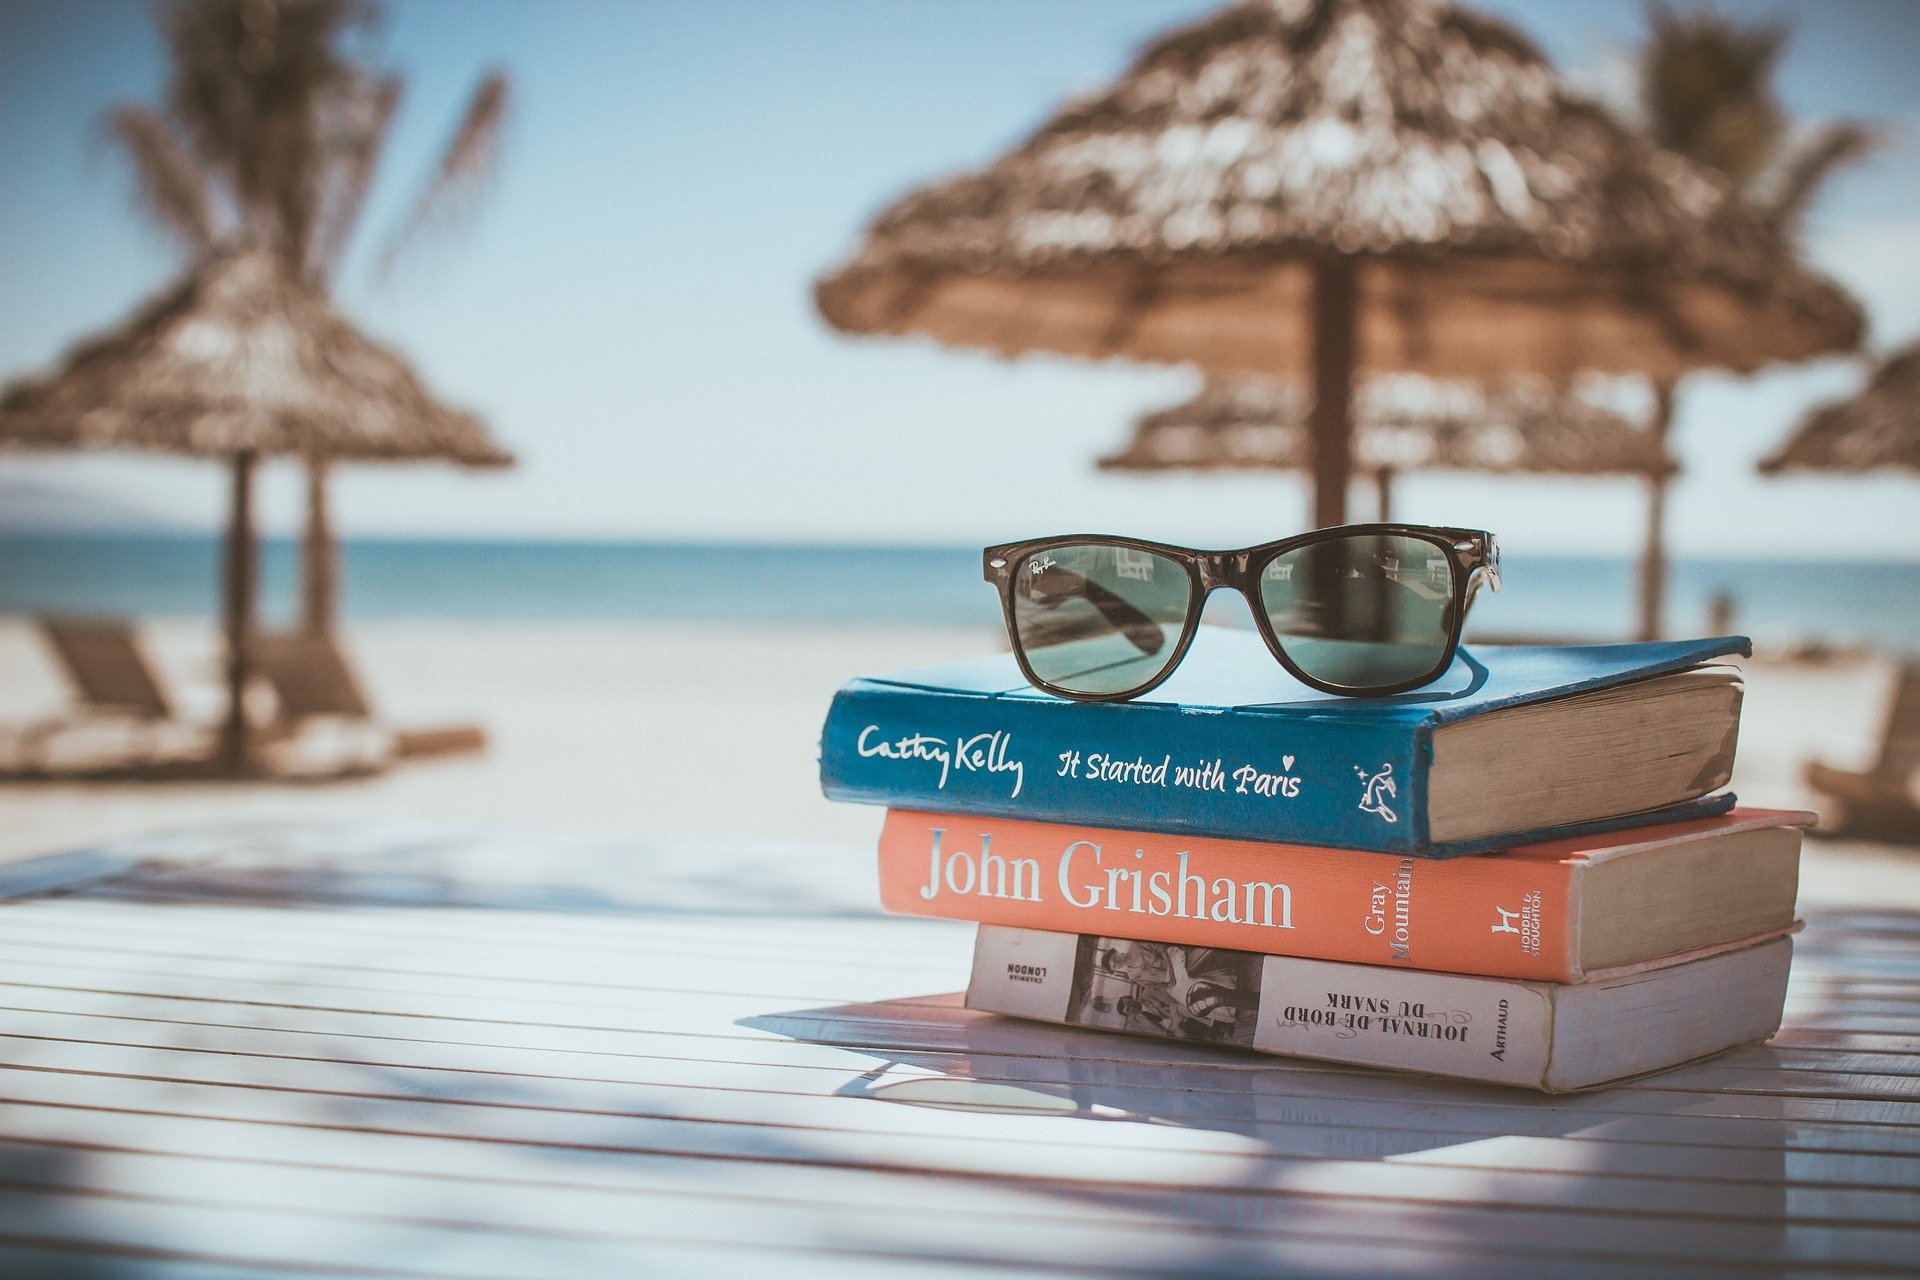 A pile of books, sunglasses on top, on table next to beach